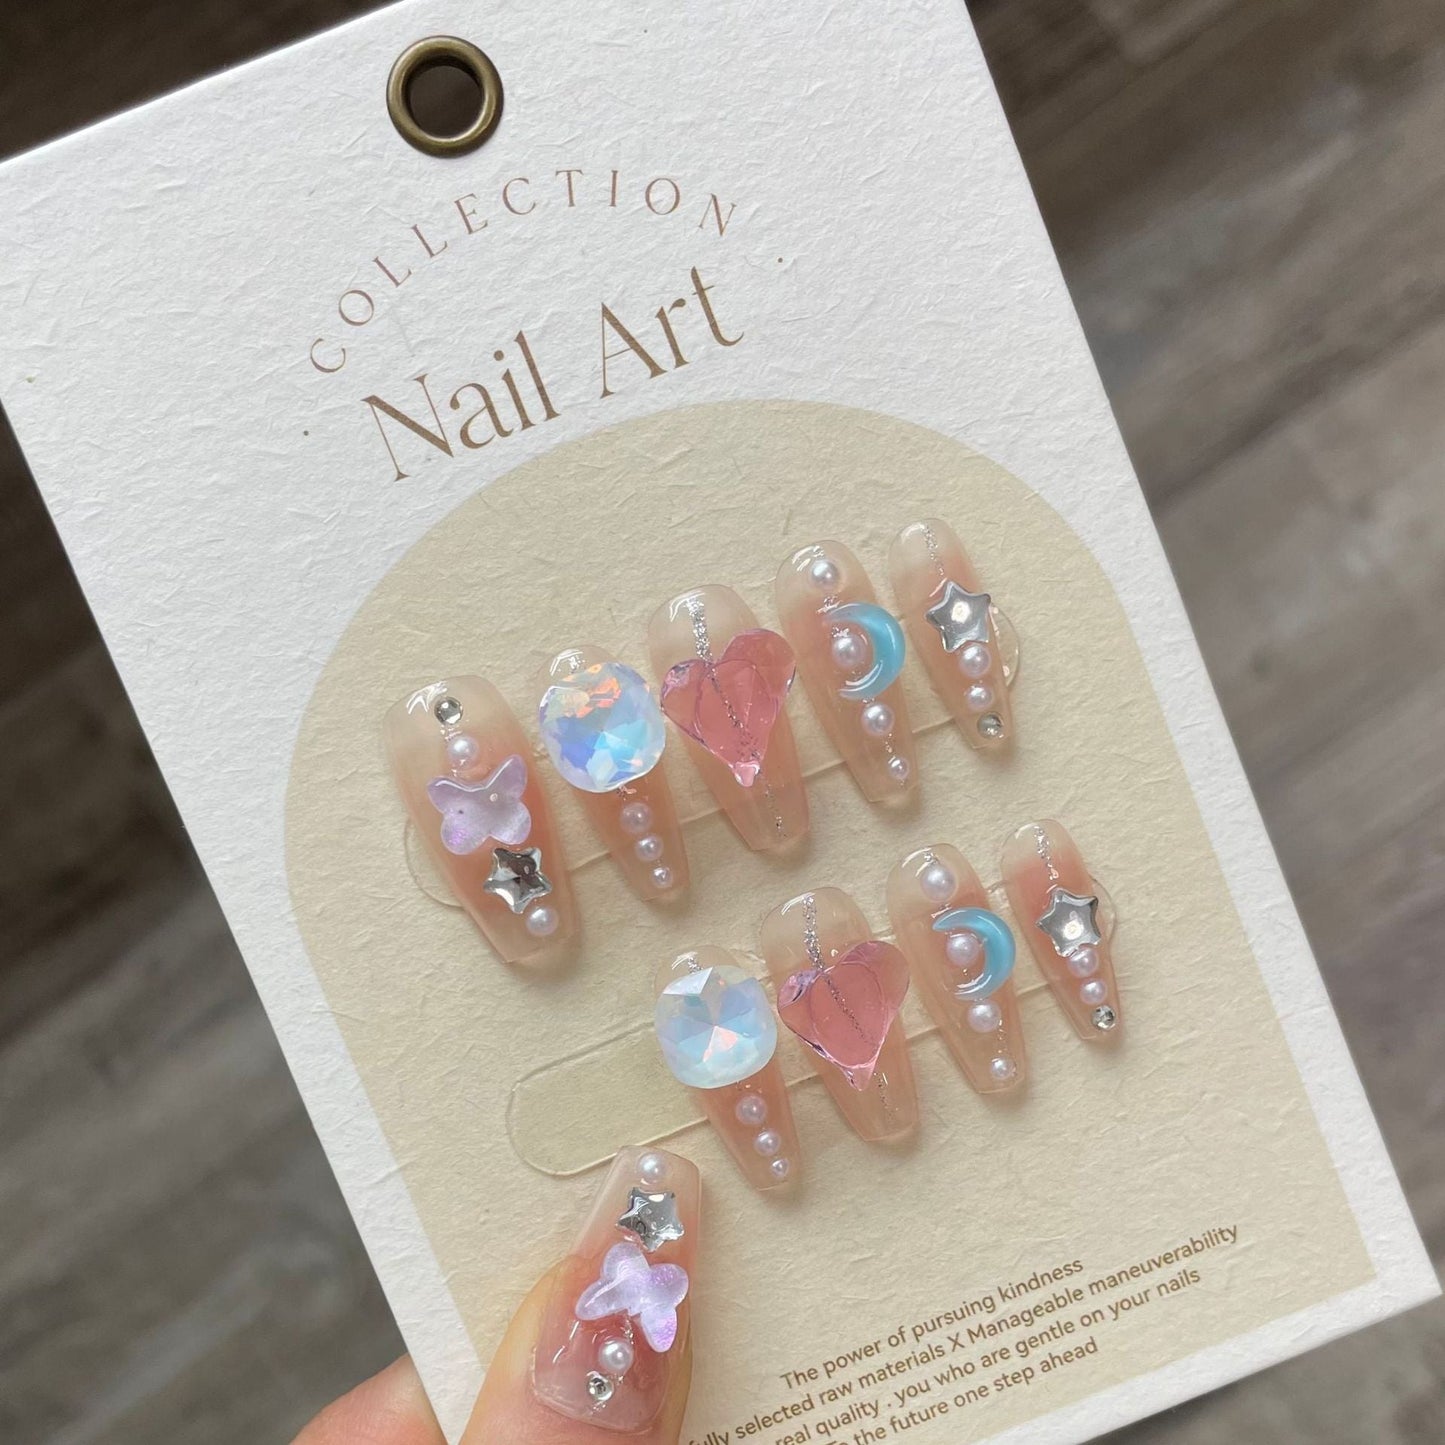 788/790 Moon and stars style press on nails 100% handmade false nails nude color pink